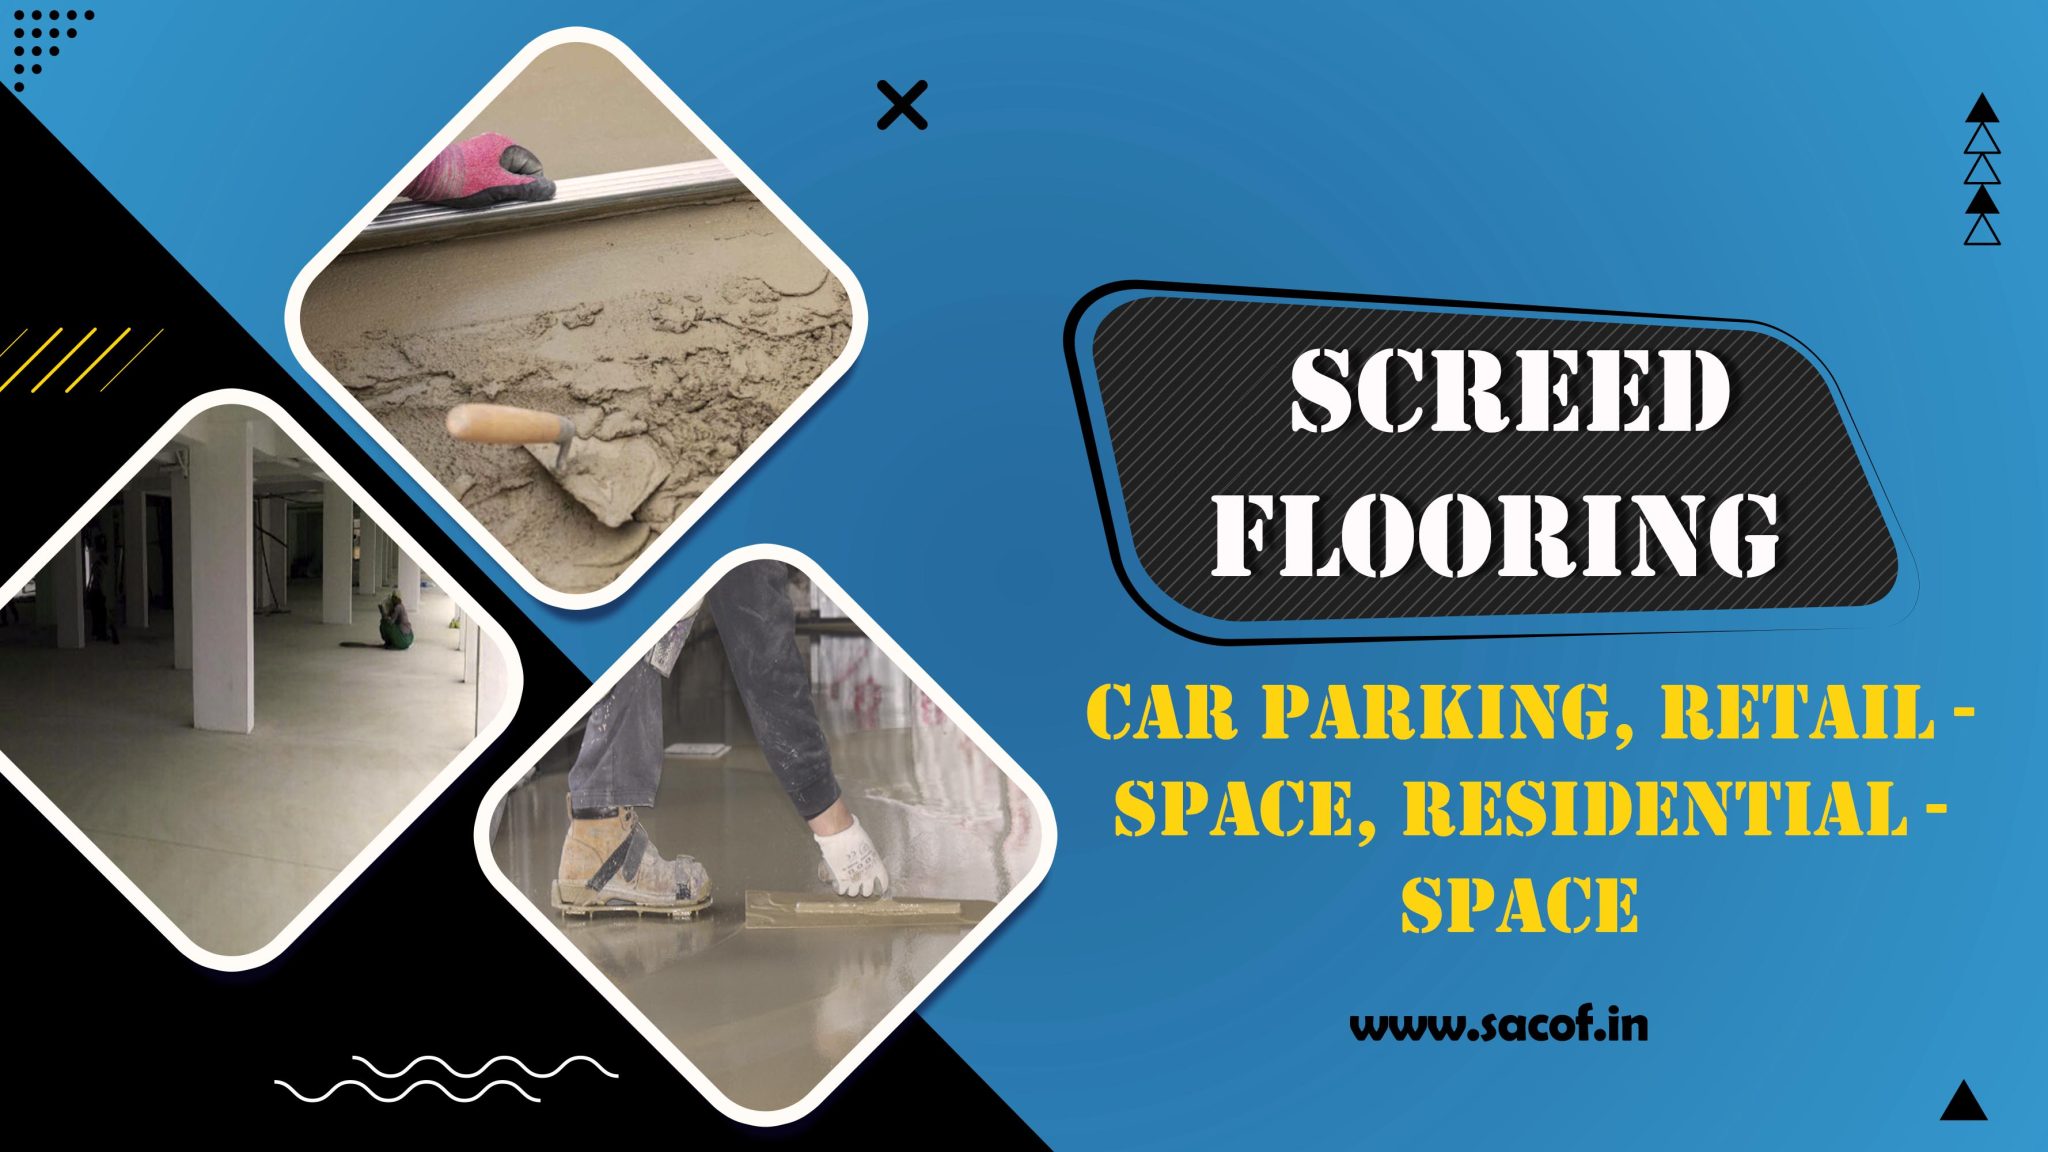 SCREED WEB BANNER 1